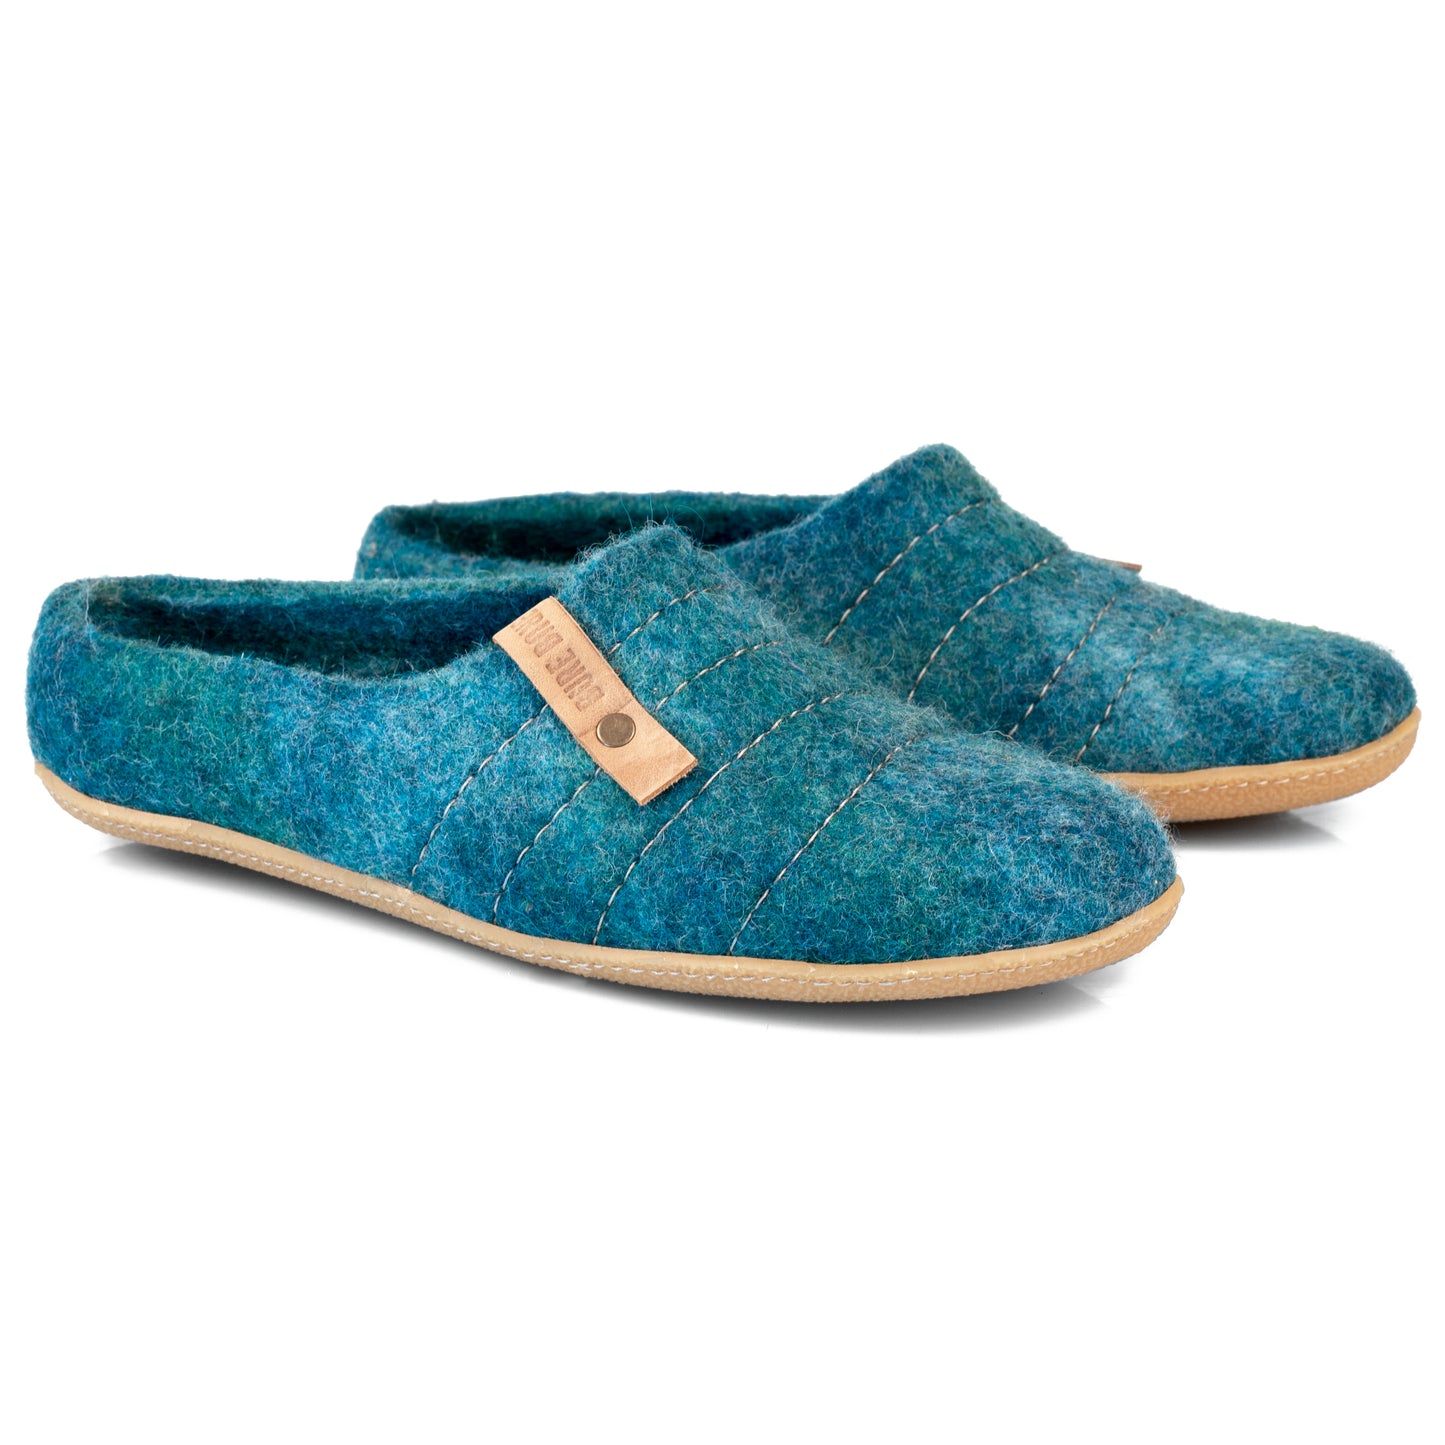 Ocean Color Low Cut Felted Wool Clogs for Man, COCOON collection, Handmade by BureBure